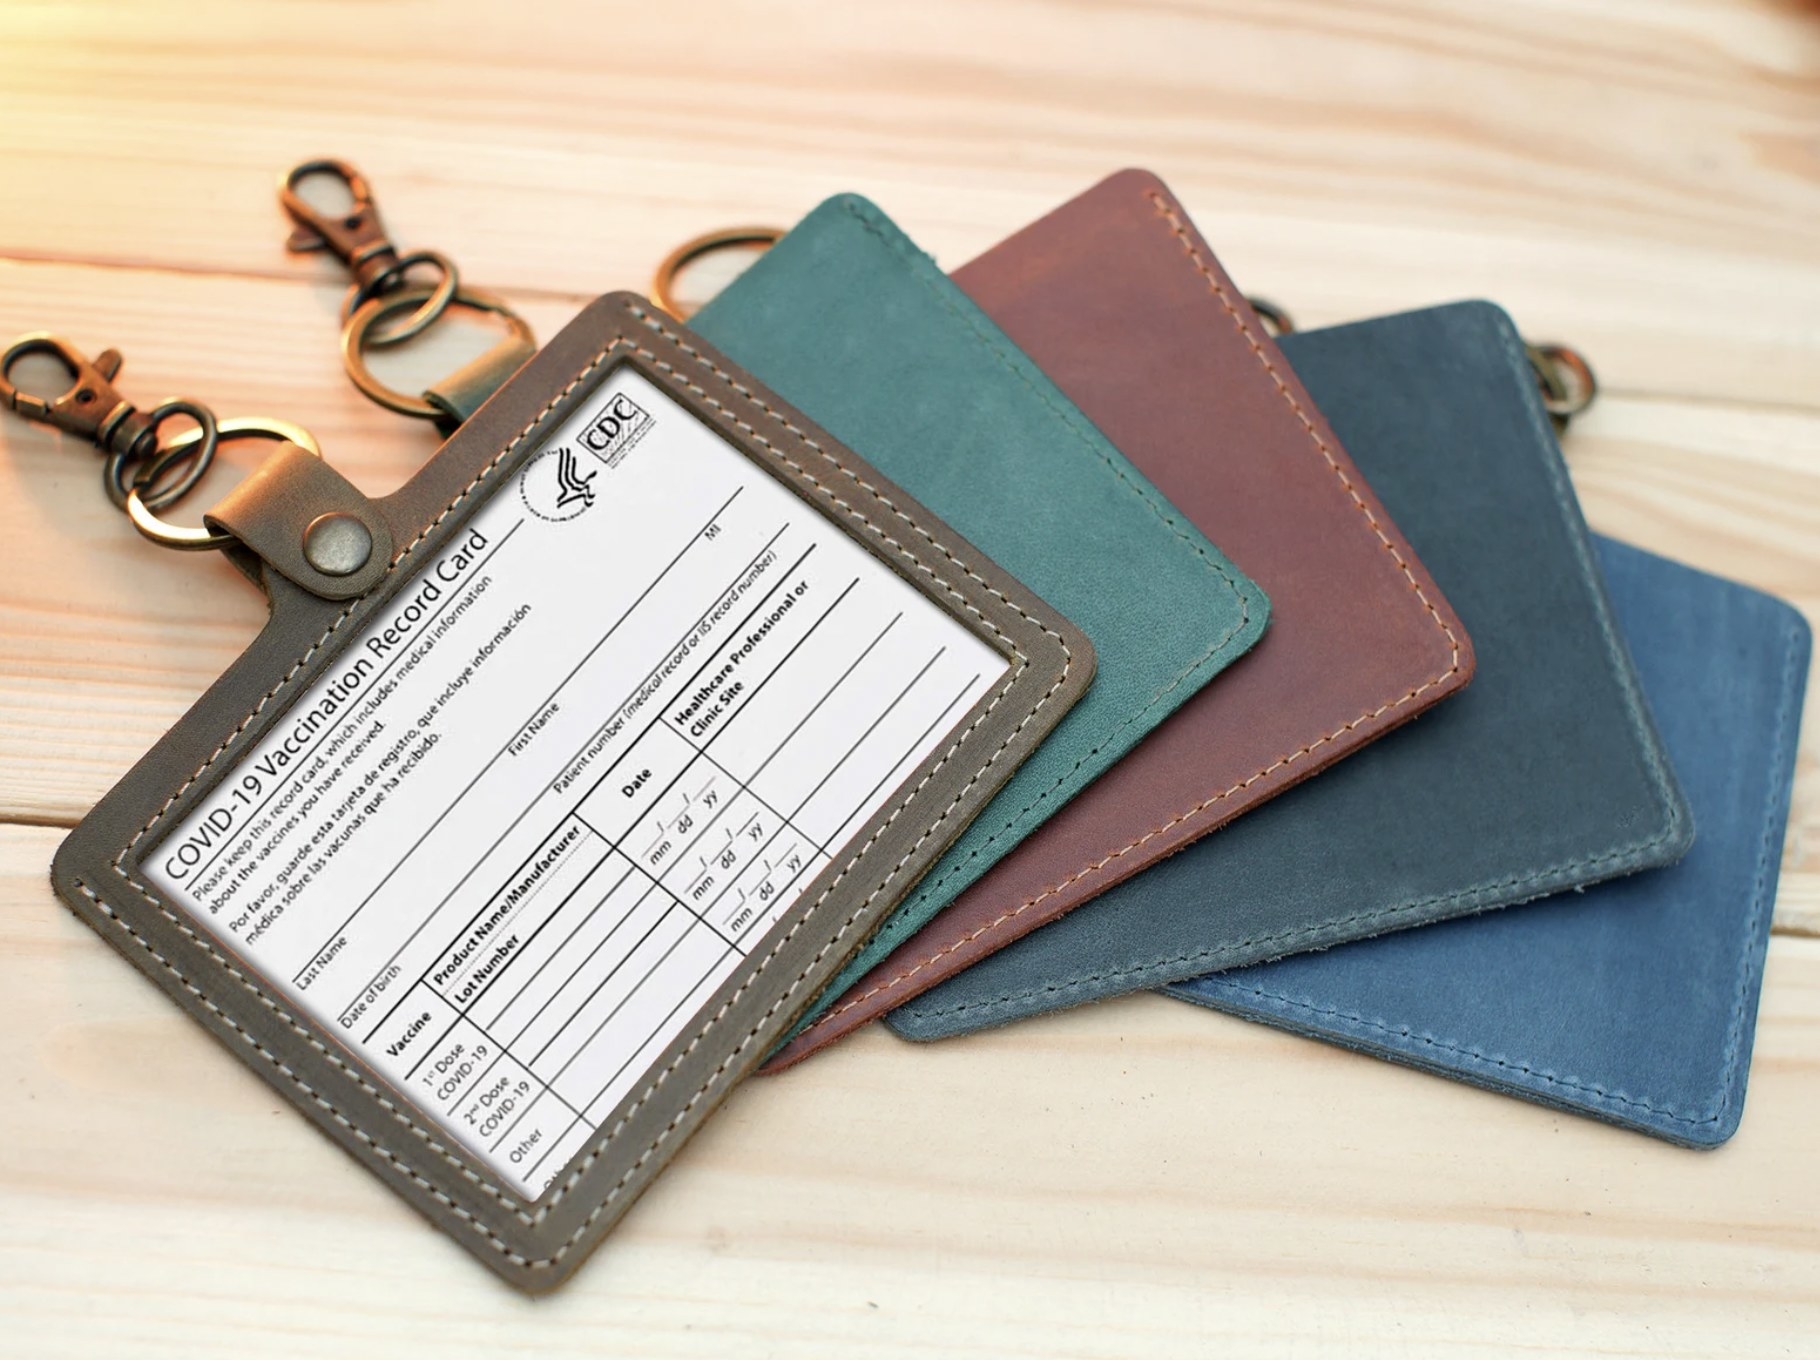 The leather vaccine card holders in multiple colors